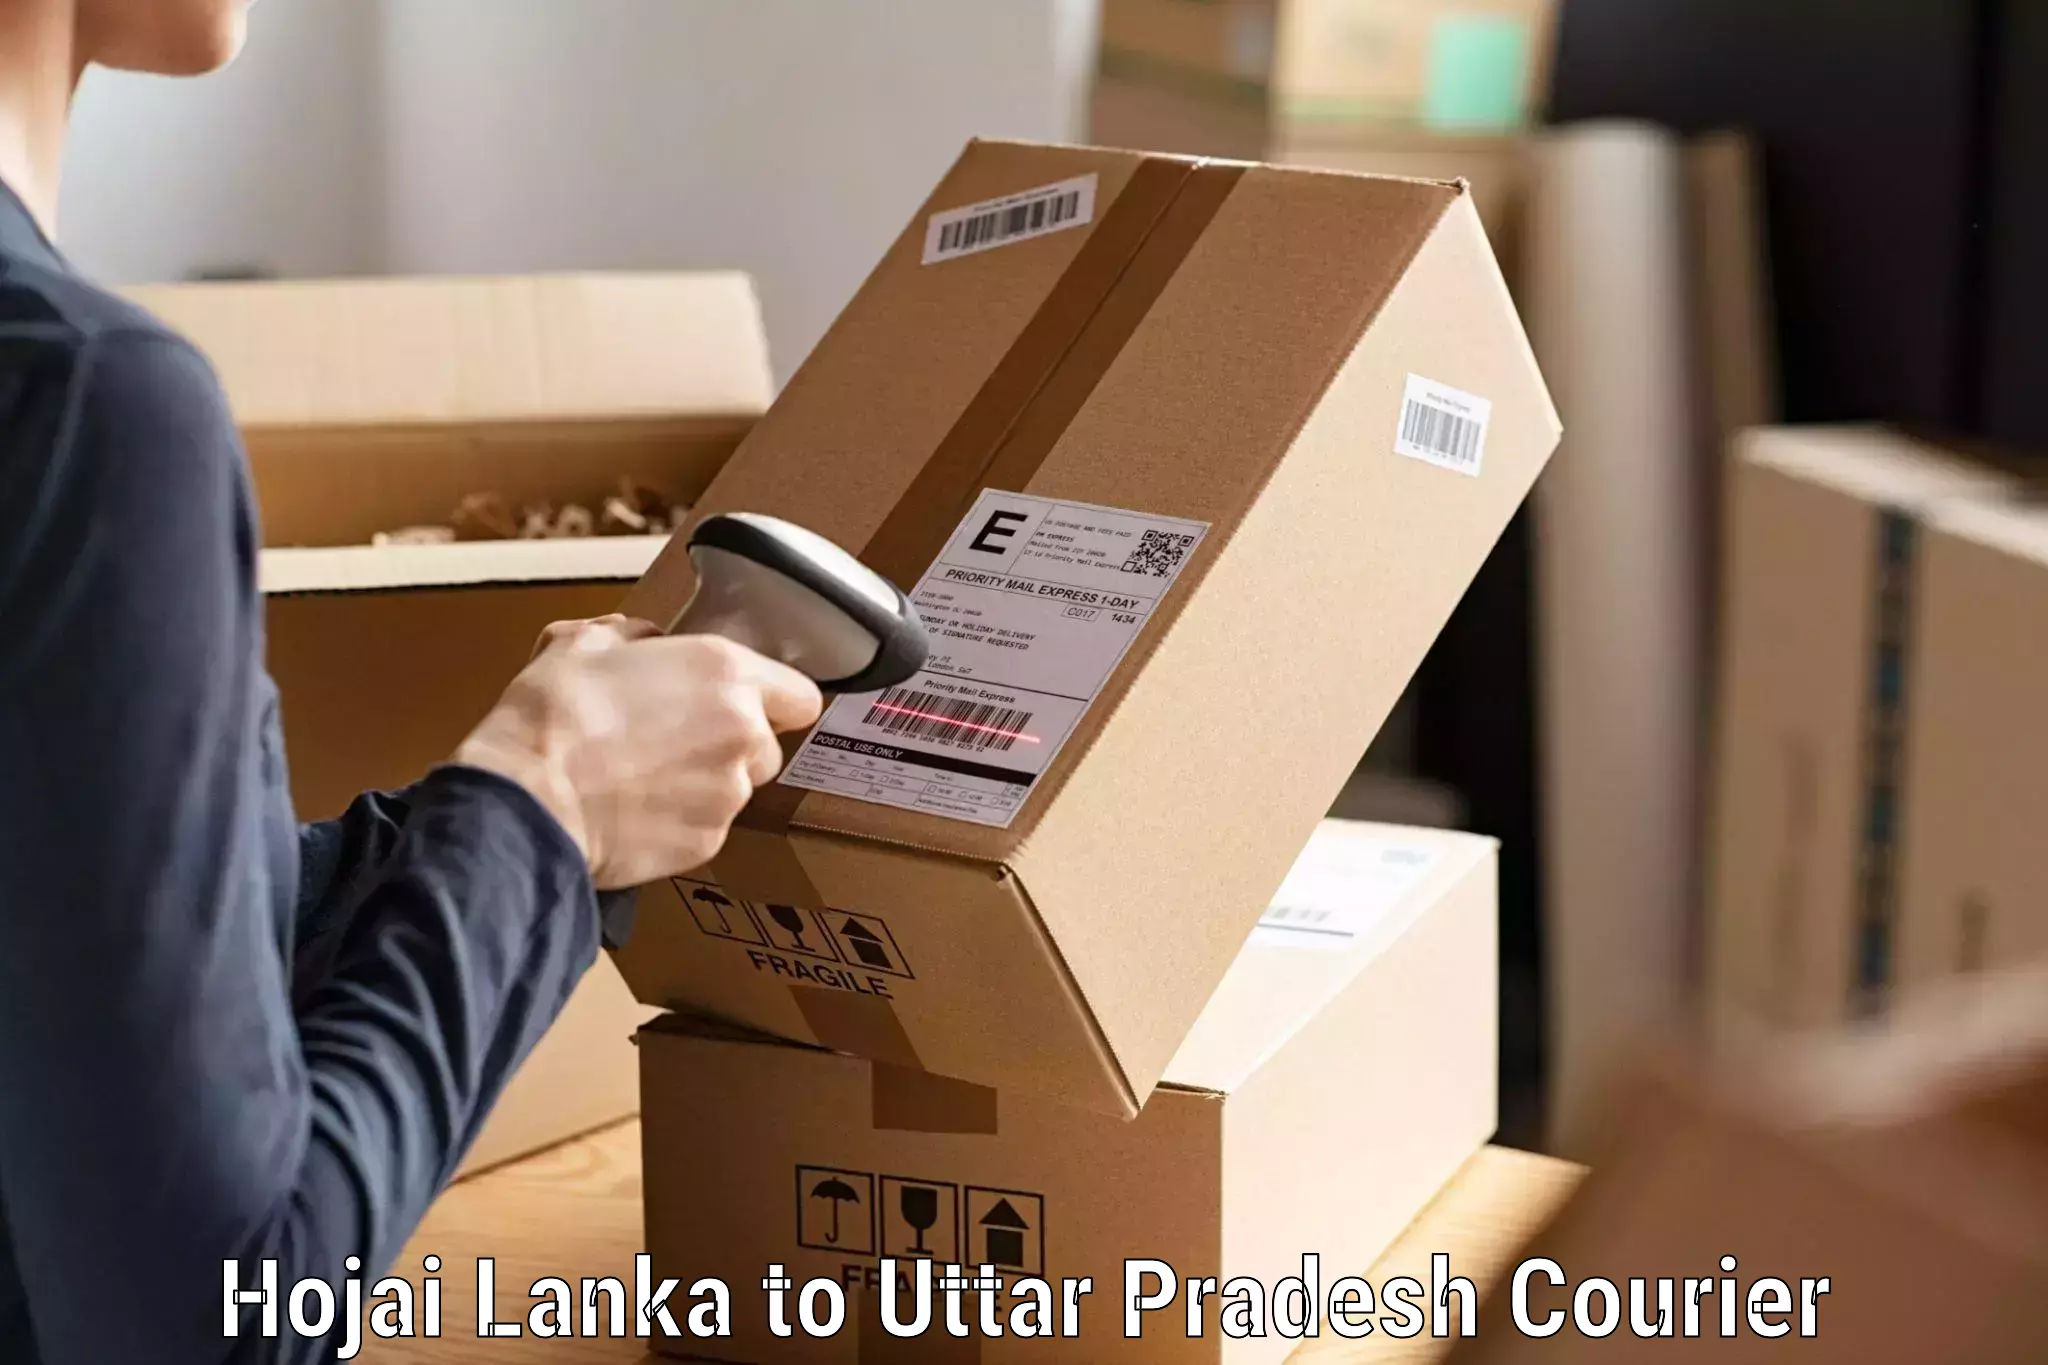 Express delivery solutions Hojai Lanka to Jalalpur